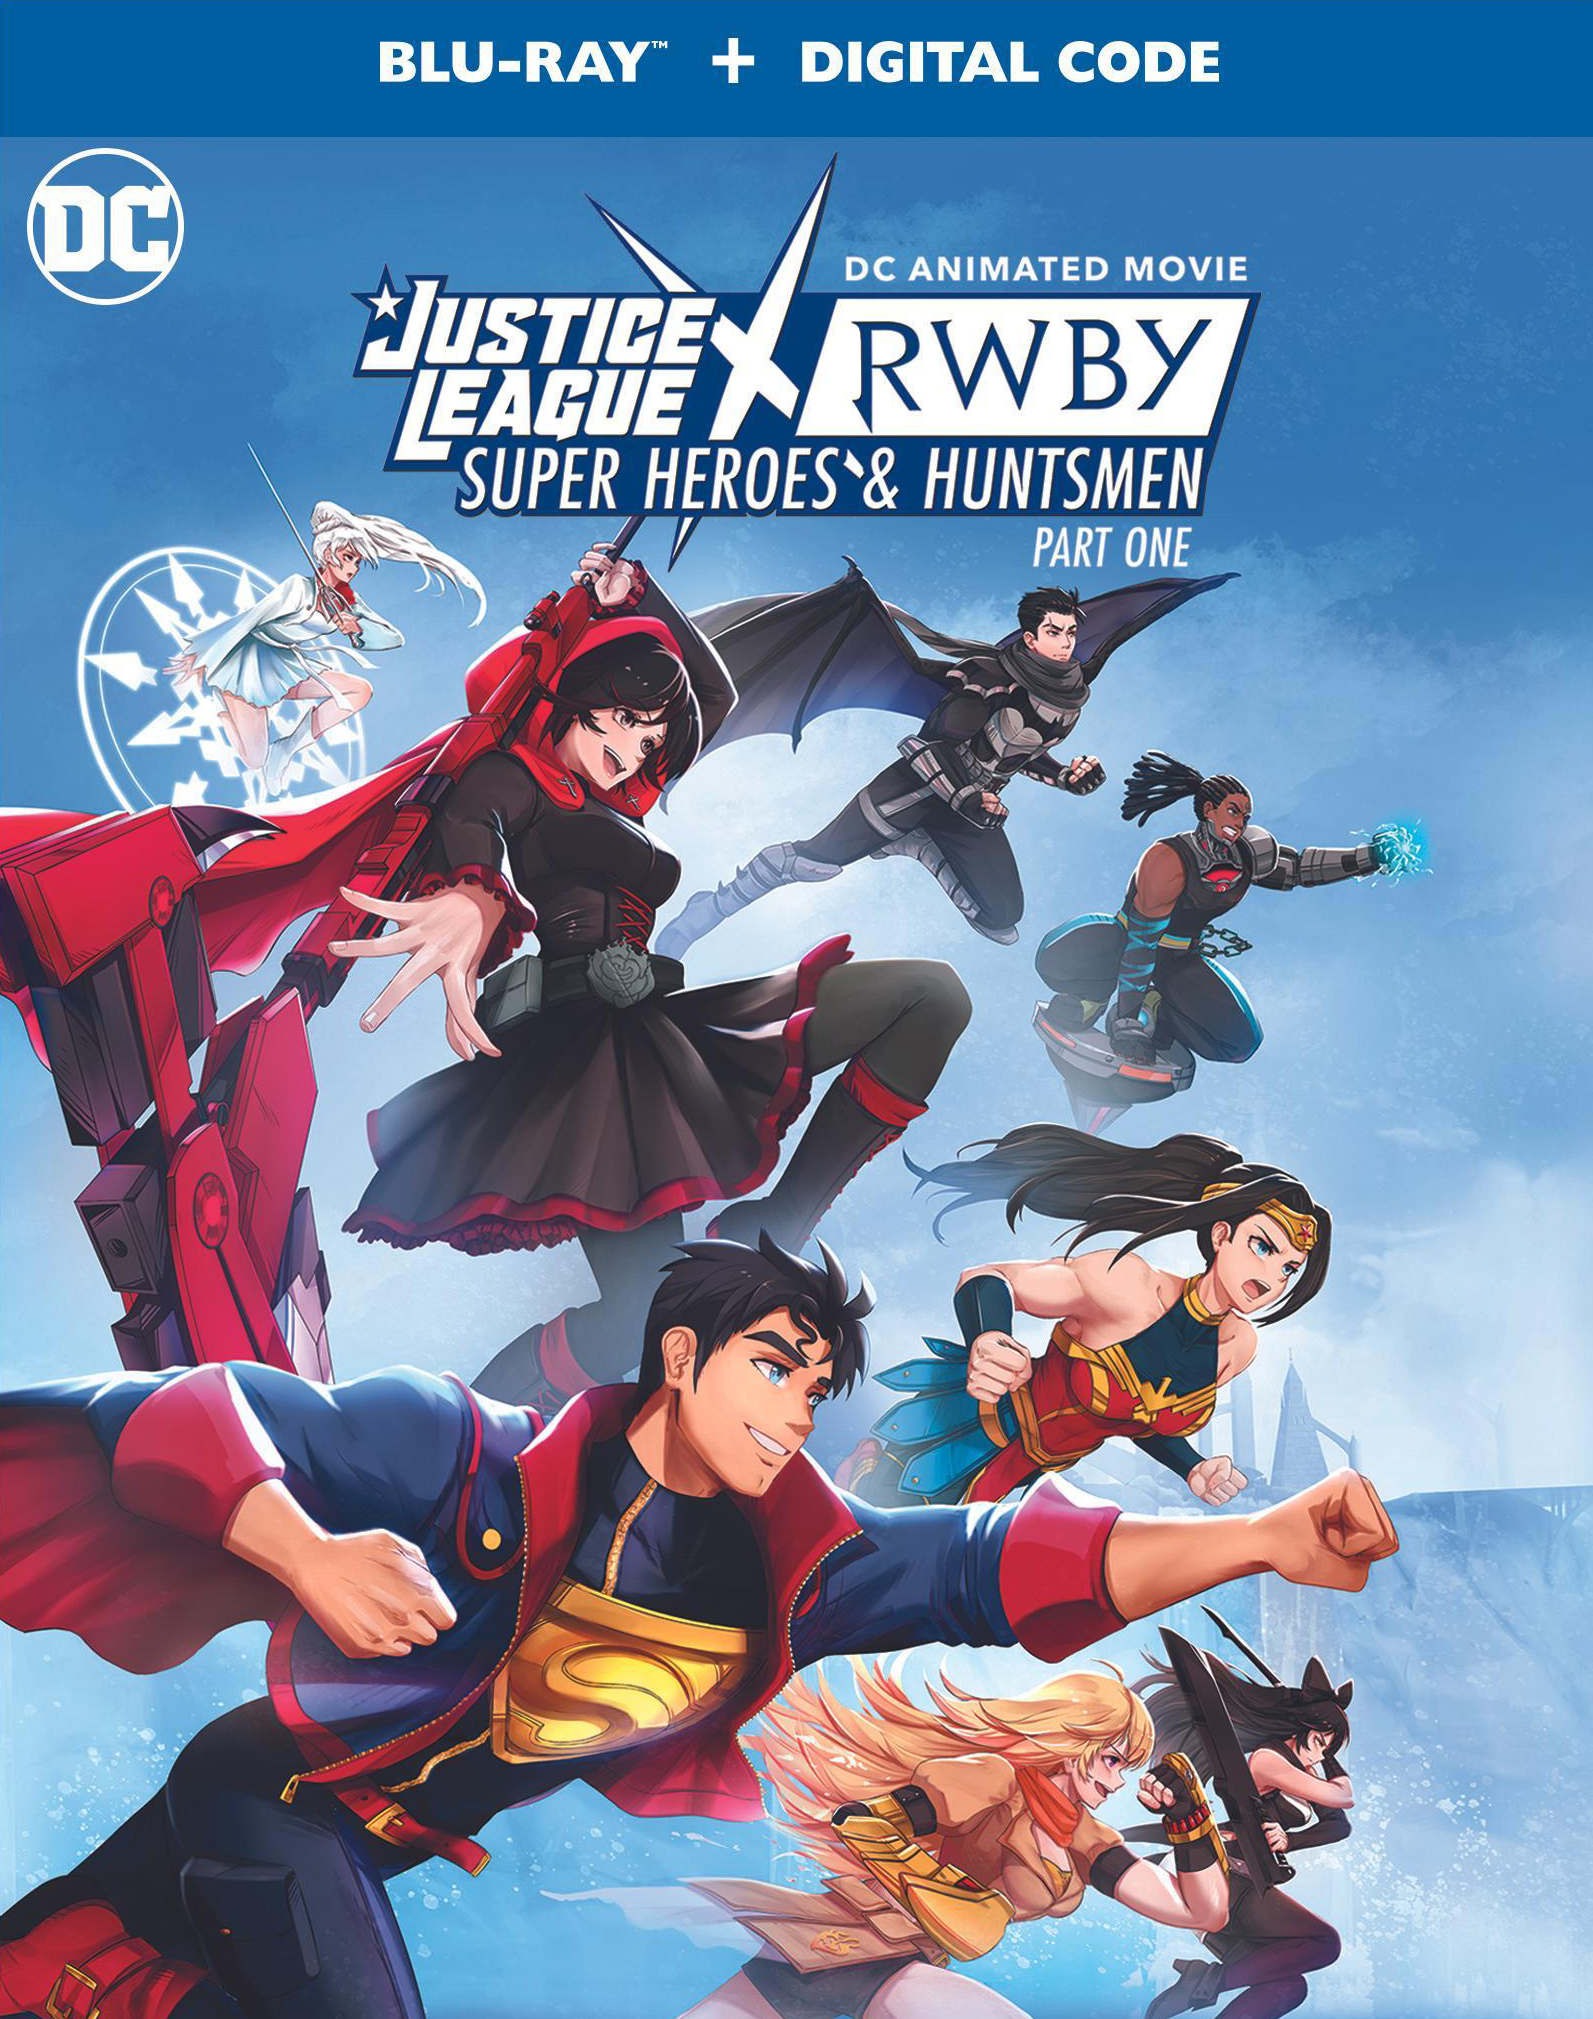 Justice League Unlimited: Heroes: Various: 9781401222024: Books